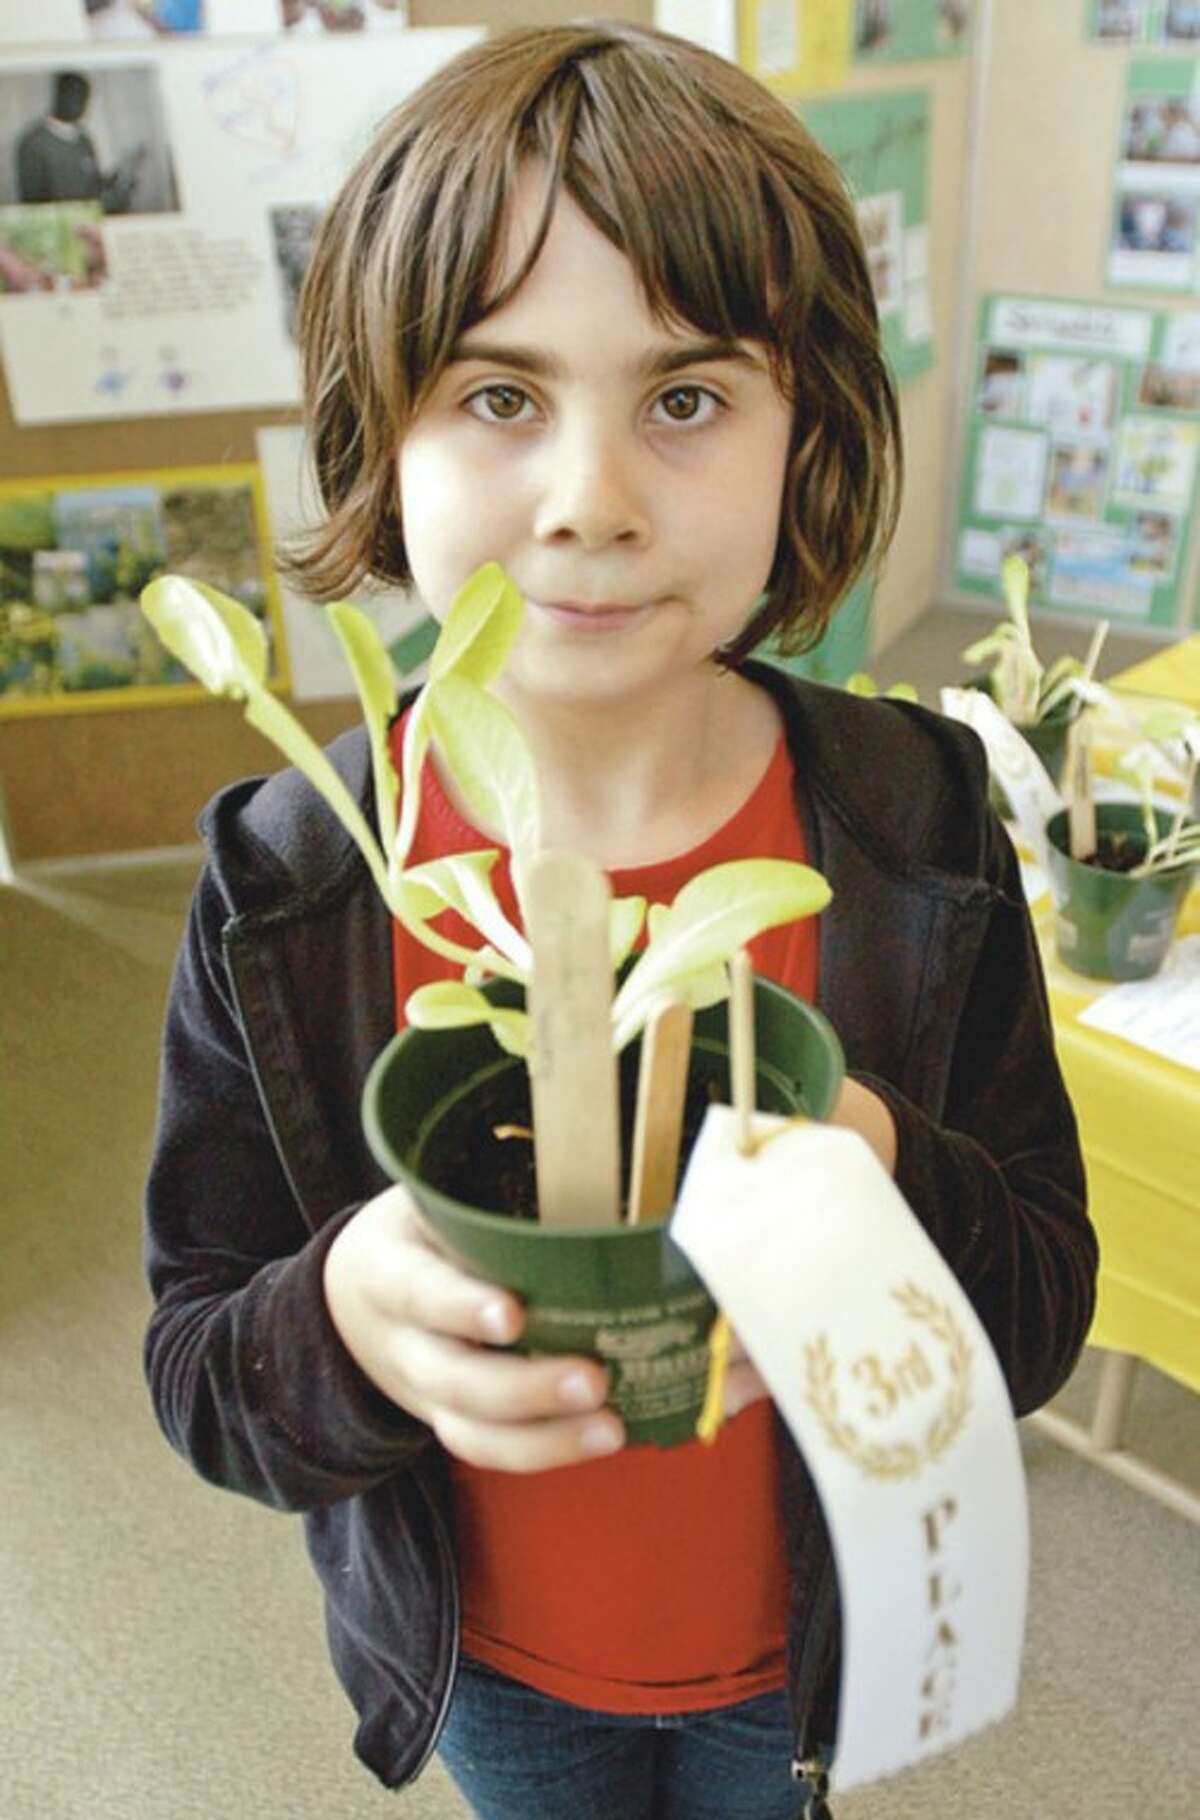 900 Stamford students from 54 different classes, including from Springdale Elementary 2nd grader Alexandra Scully who won a third prize, submitted their homegrown lettuce to be judged by a panel for the 2nd annual "Lettuce Challenge Contest" award event at the Government Center Thursday which was sponsored by the Stamford Garden Club. Hour photo / Erik Trautmann